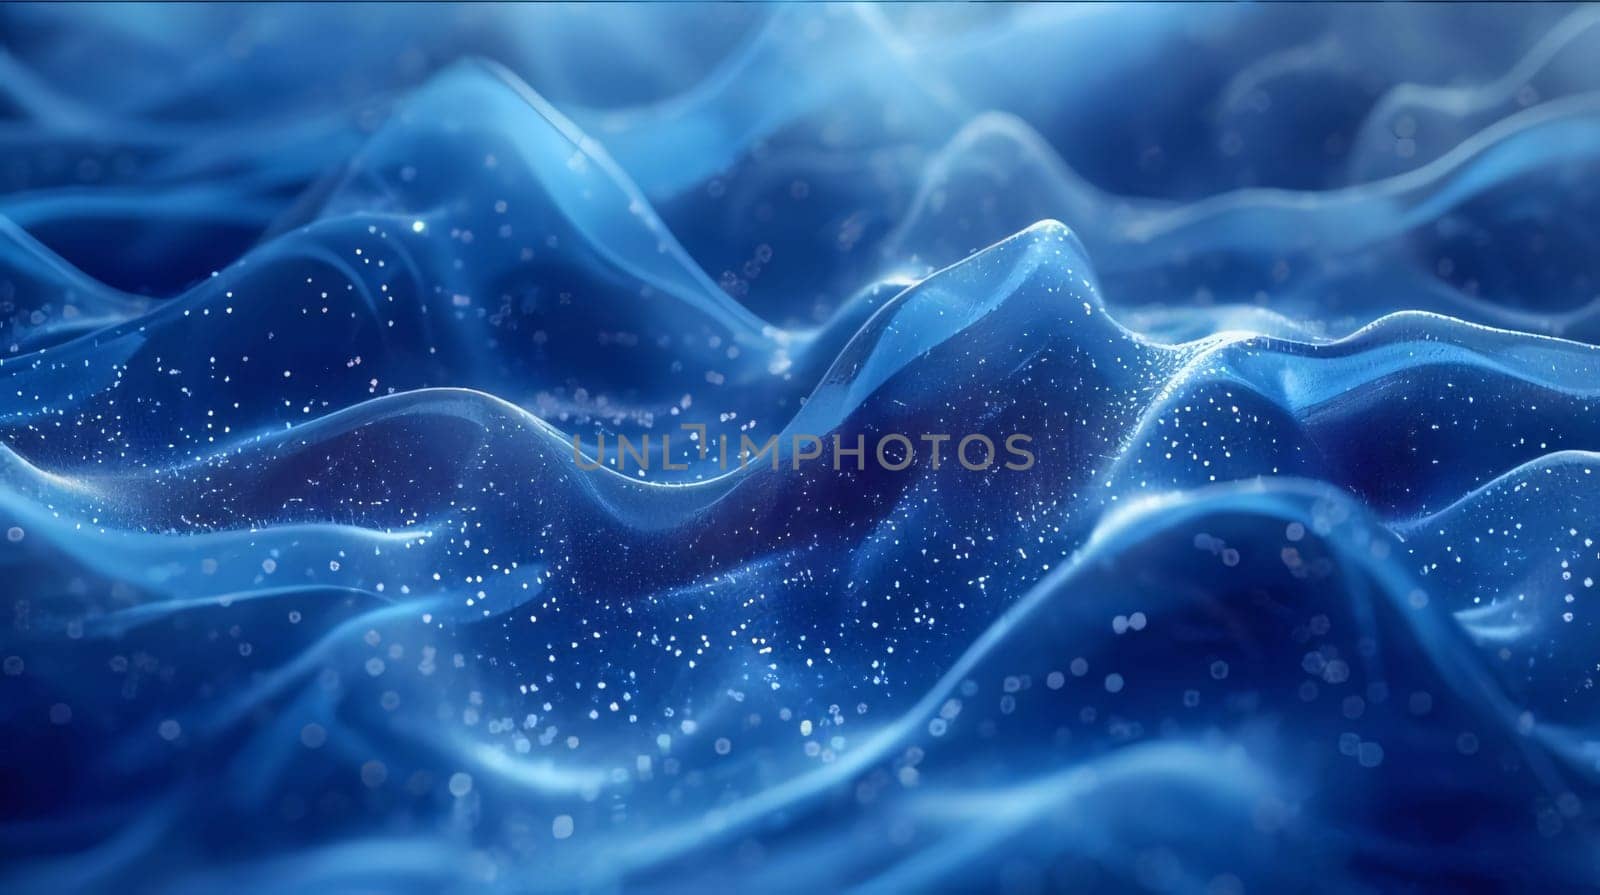 Abstract background design: 3d rendering of abstract wavy background with glowing particles in empty space